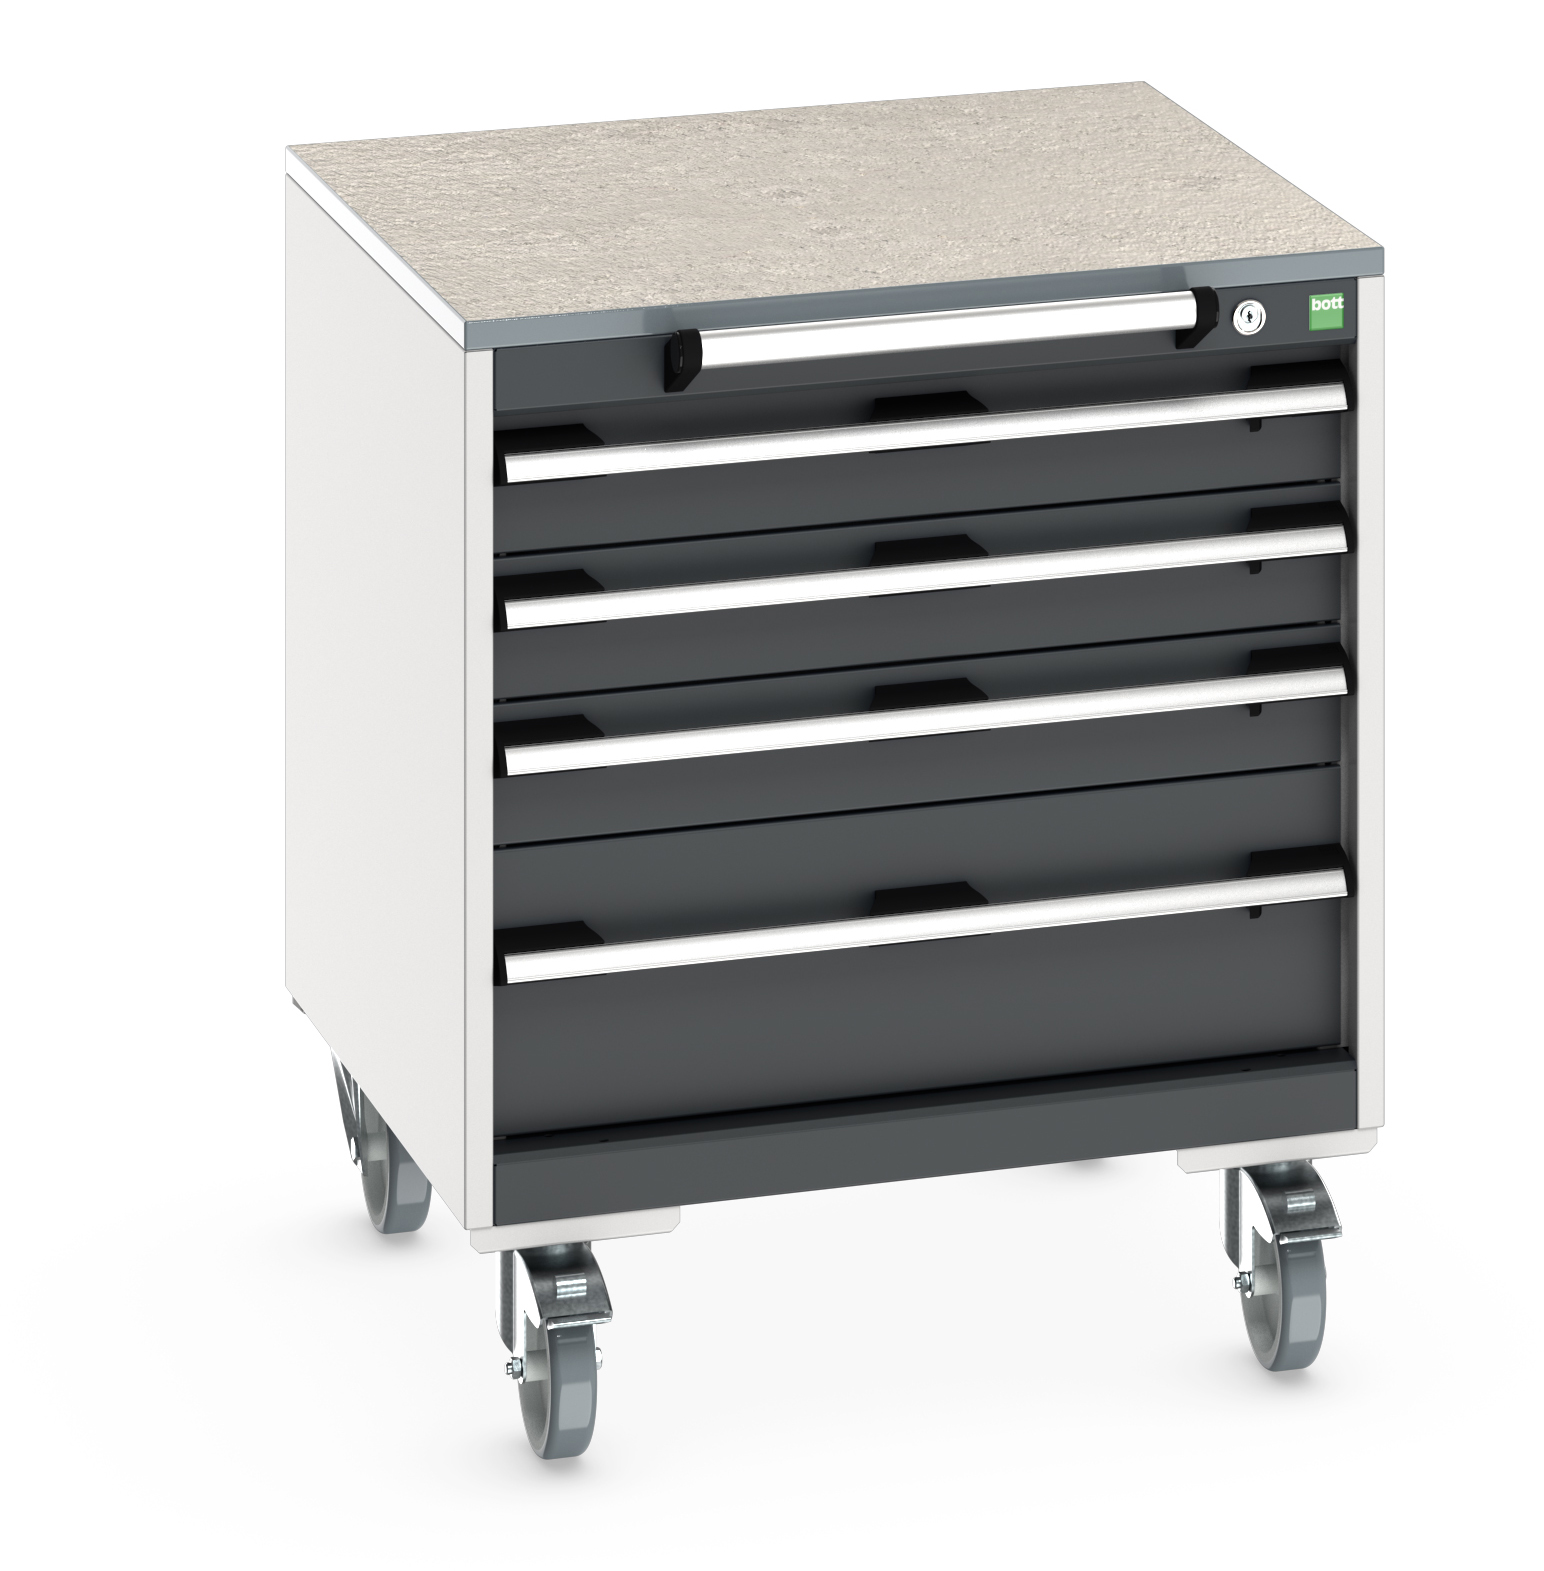 Bott Cubio Mobile Drawer Cabinet With 4 Drawers & Lino Worktop - 40402144.19V